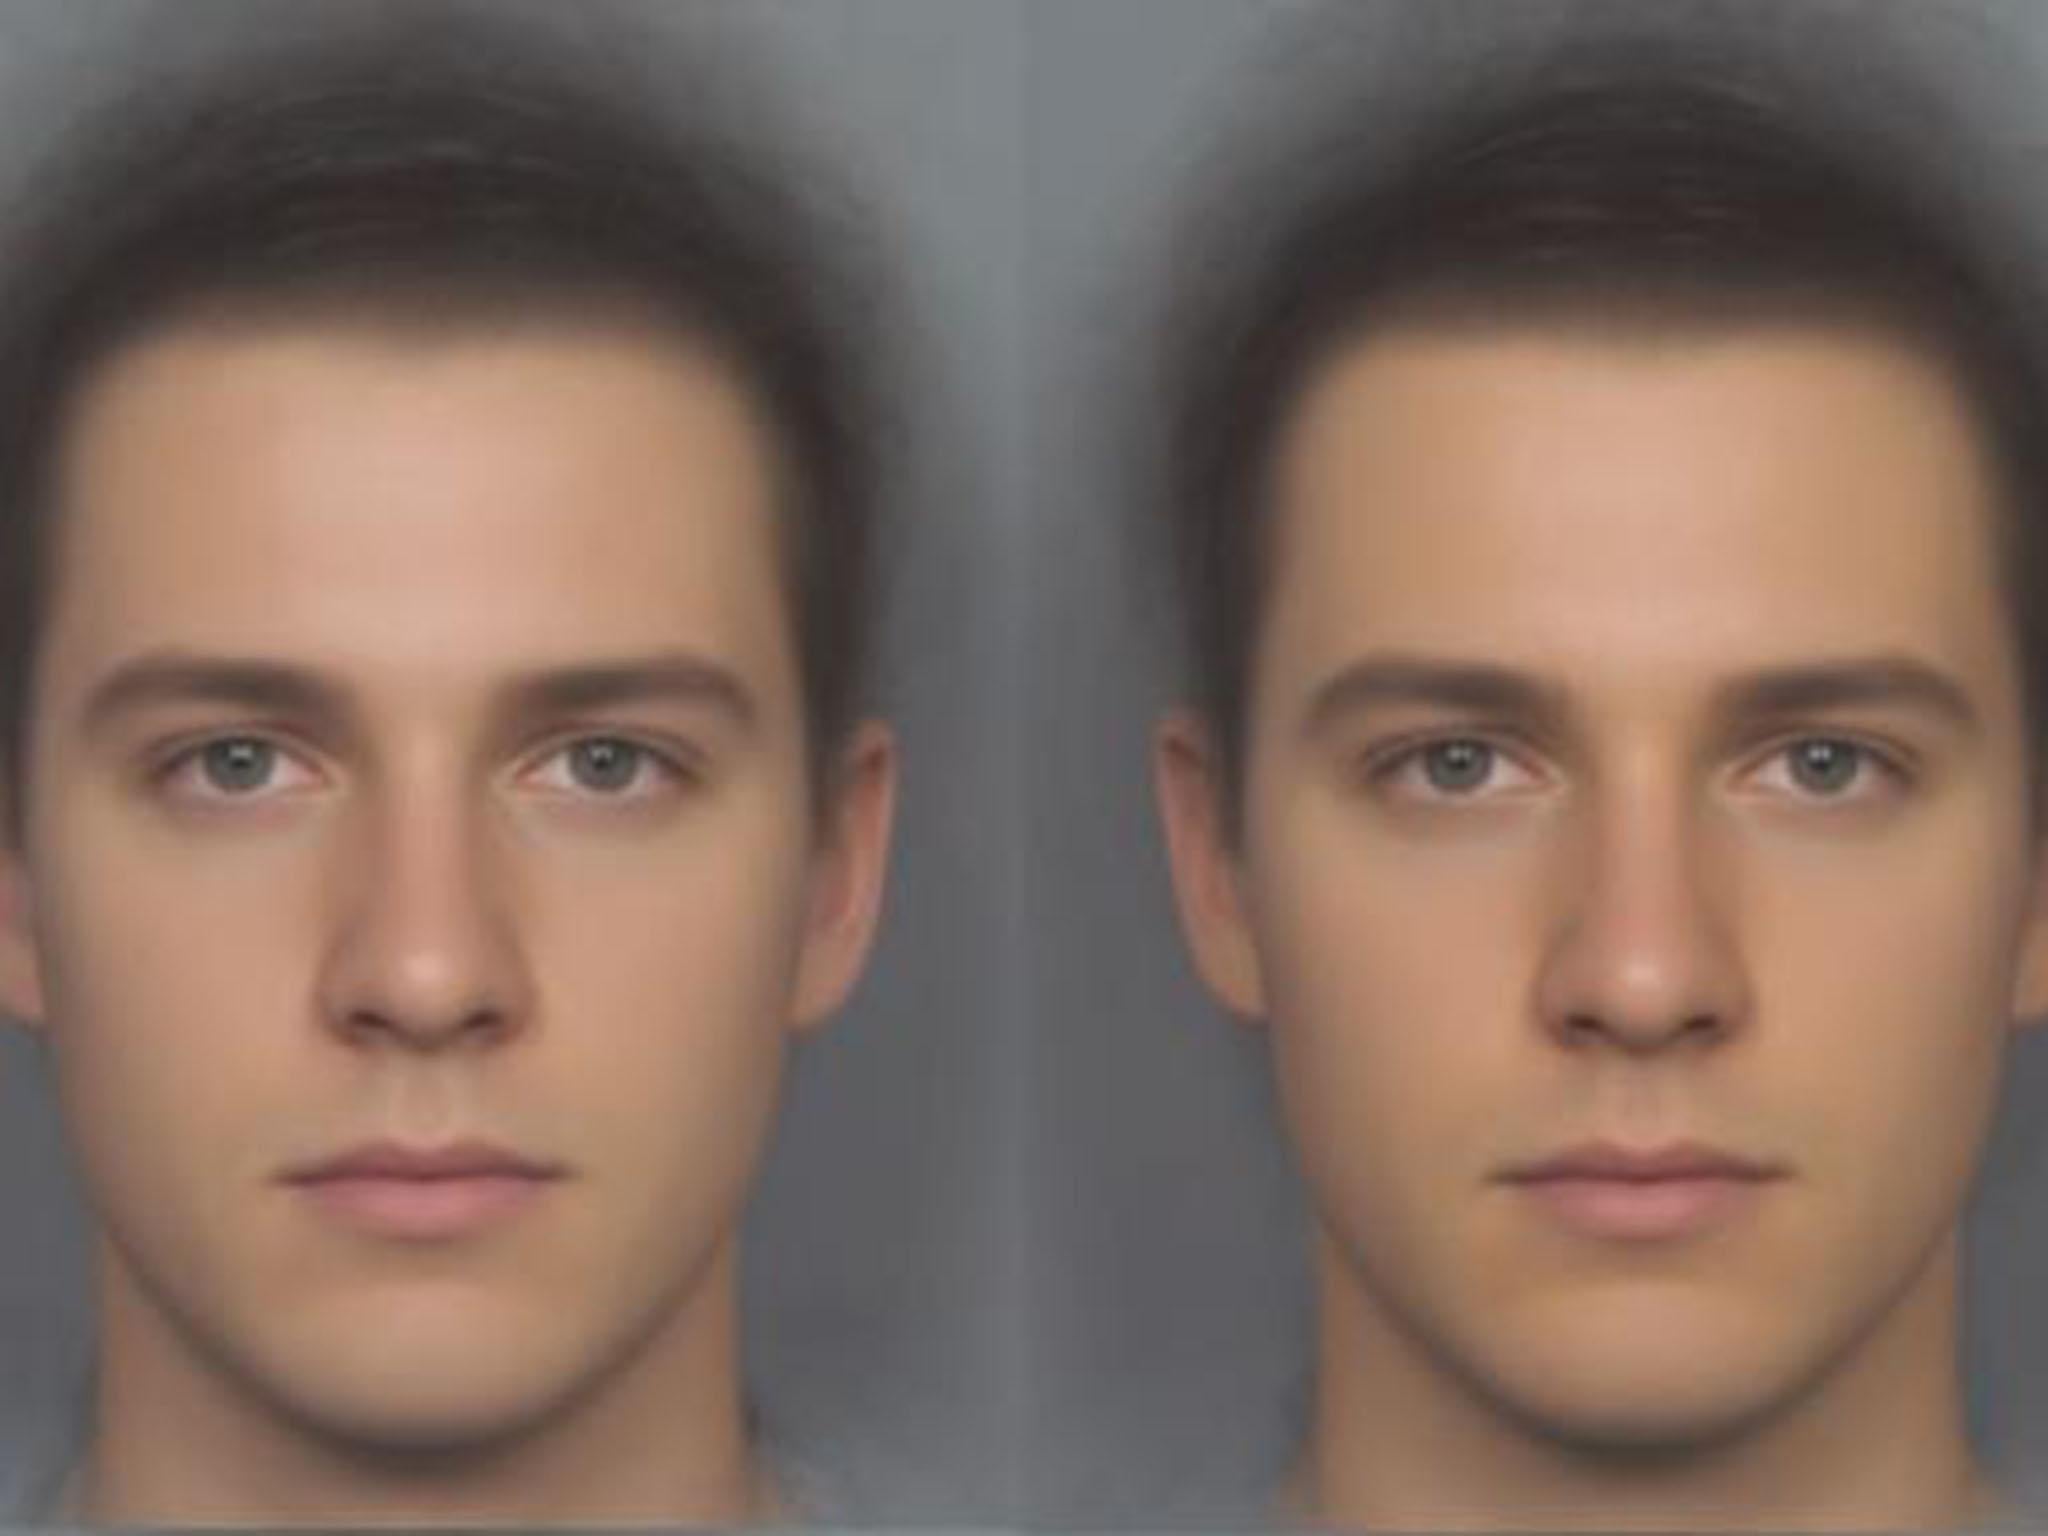 The face on the right, which shows a man after taking beta-carotene supplements, was rated as more attractive and healthier by women